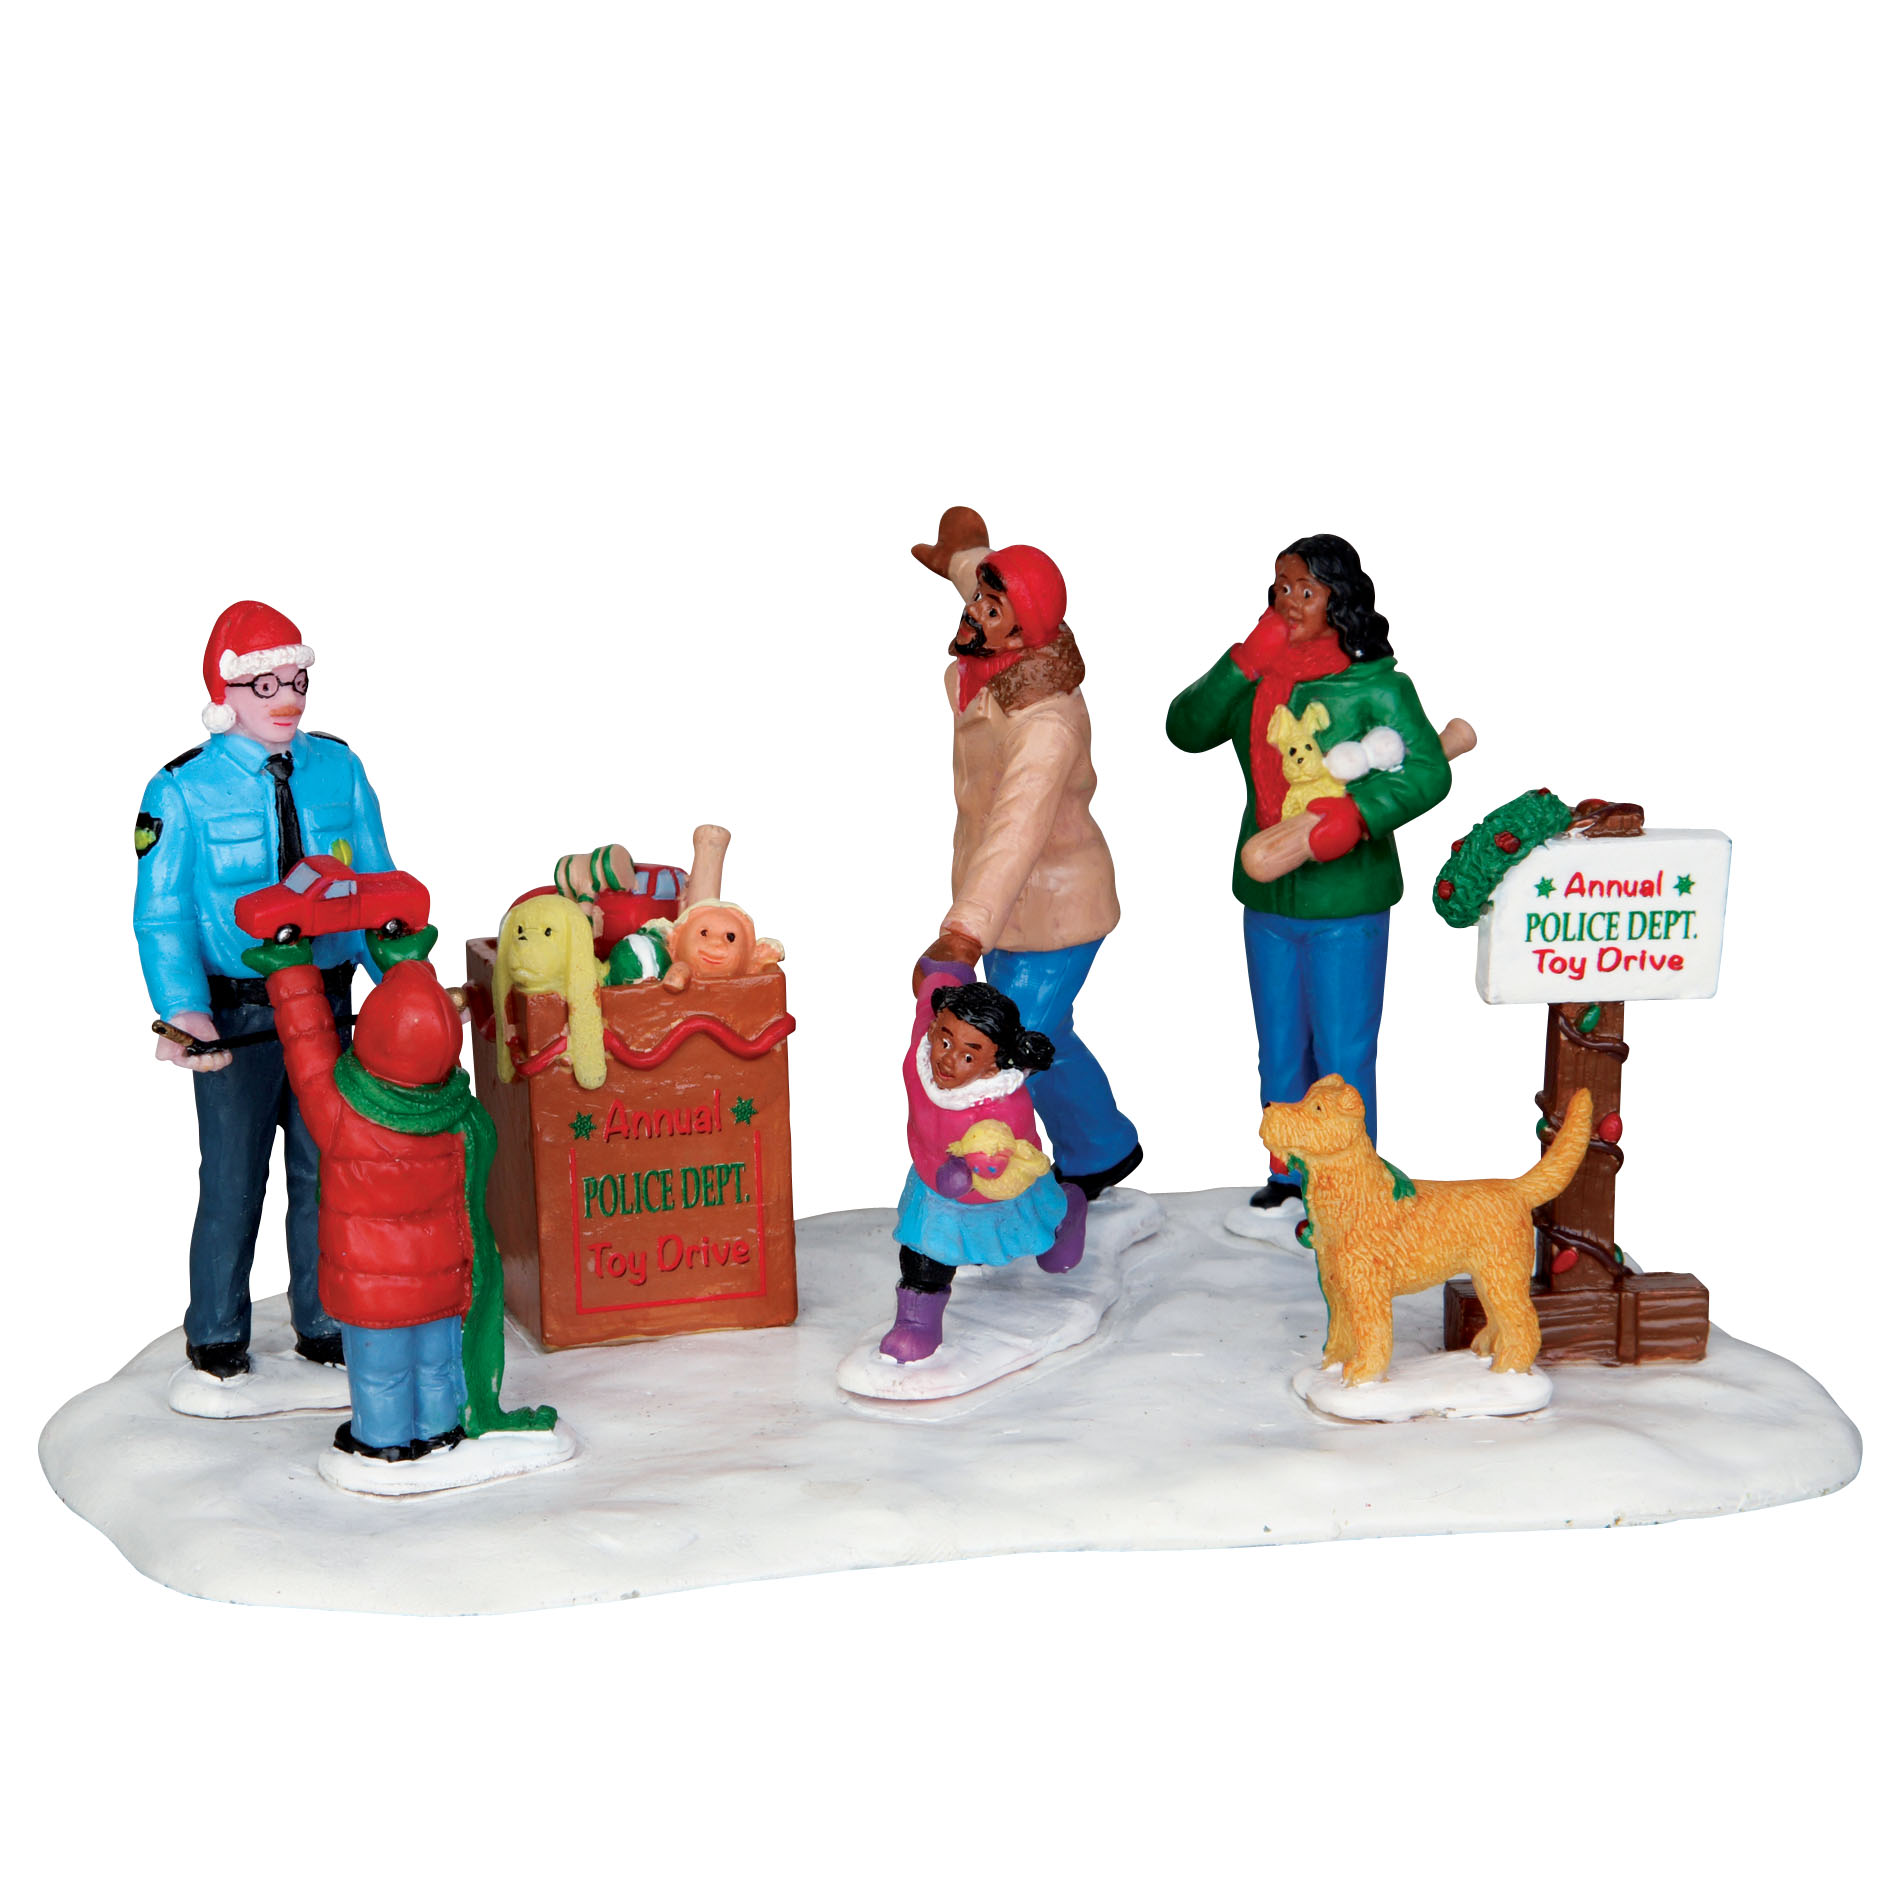 Lemax Village Collection Christmas Village Accessory, Toy Drive